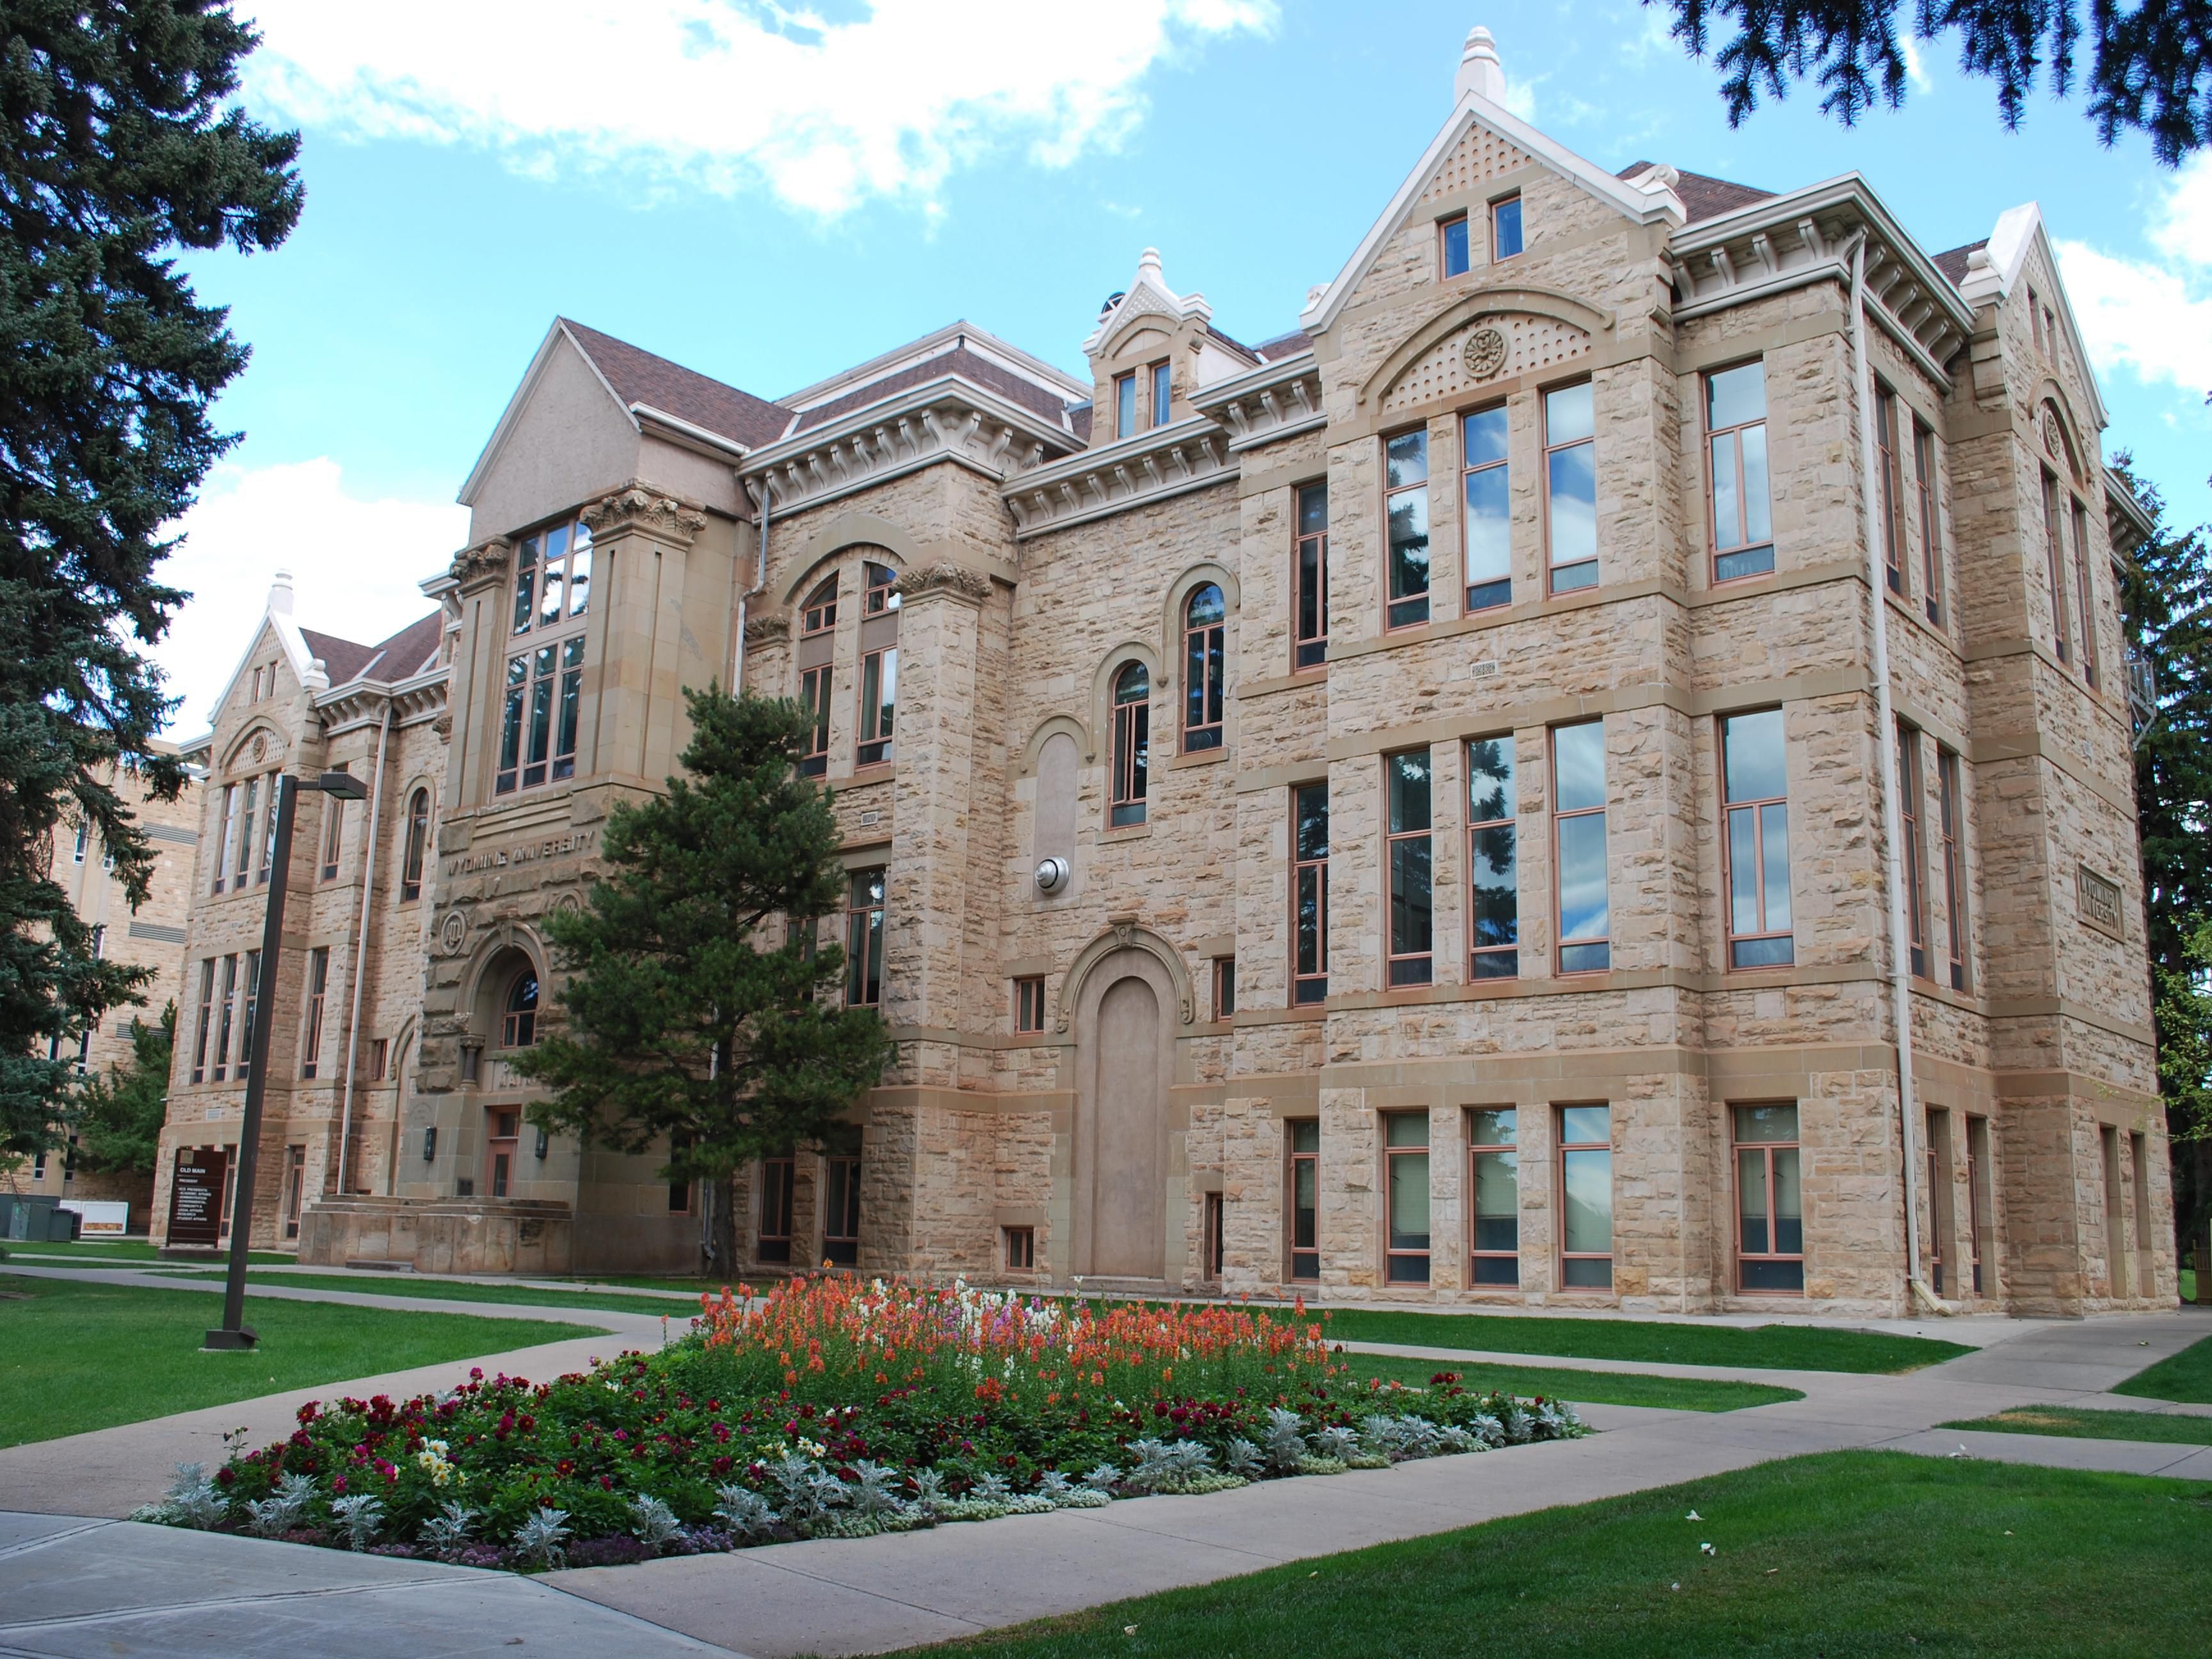 We are conveniently located less than 5 minutes from the University of Wyoming campus and sports facilities. Whether you are coming for a conference or a tour on campus, our location is convenient. 